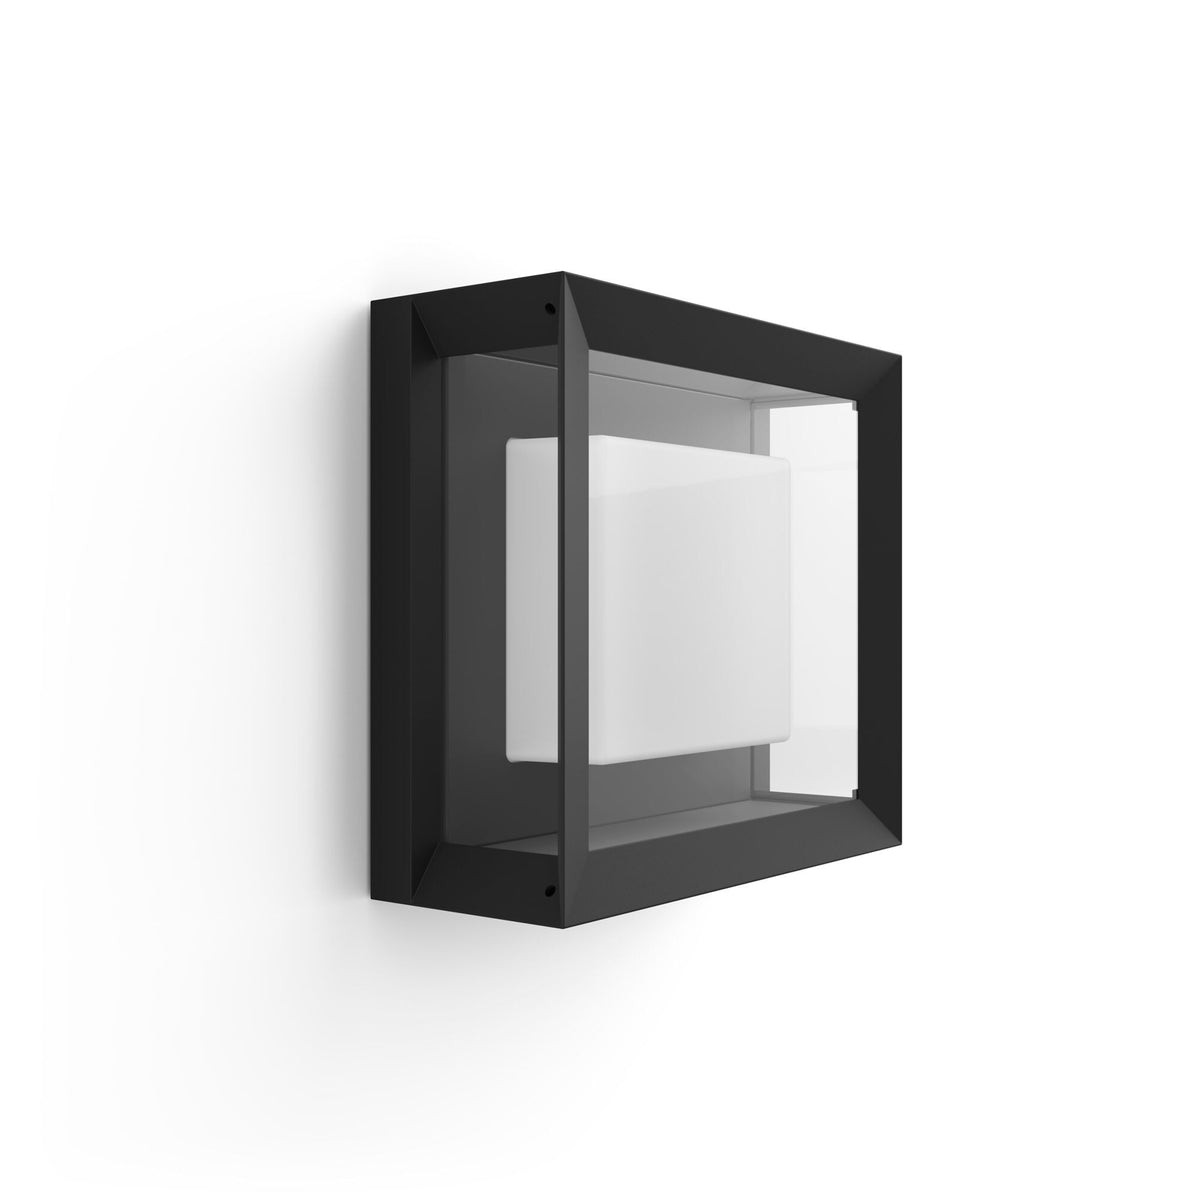 Philips Hue Econic Outdoor Wall Light in Black - White and colour ambiance